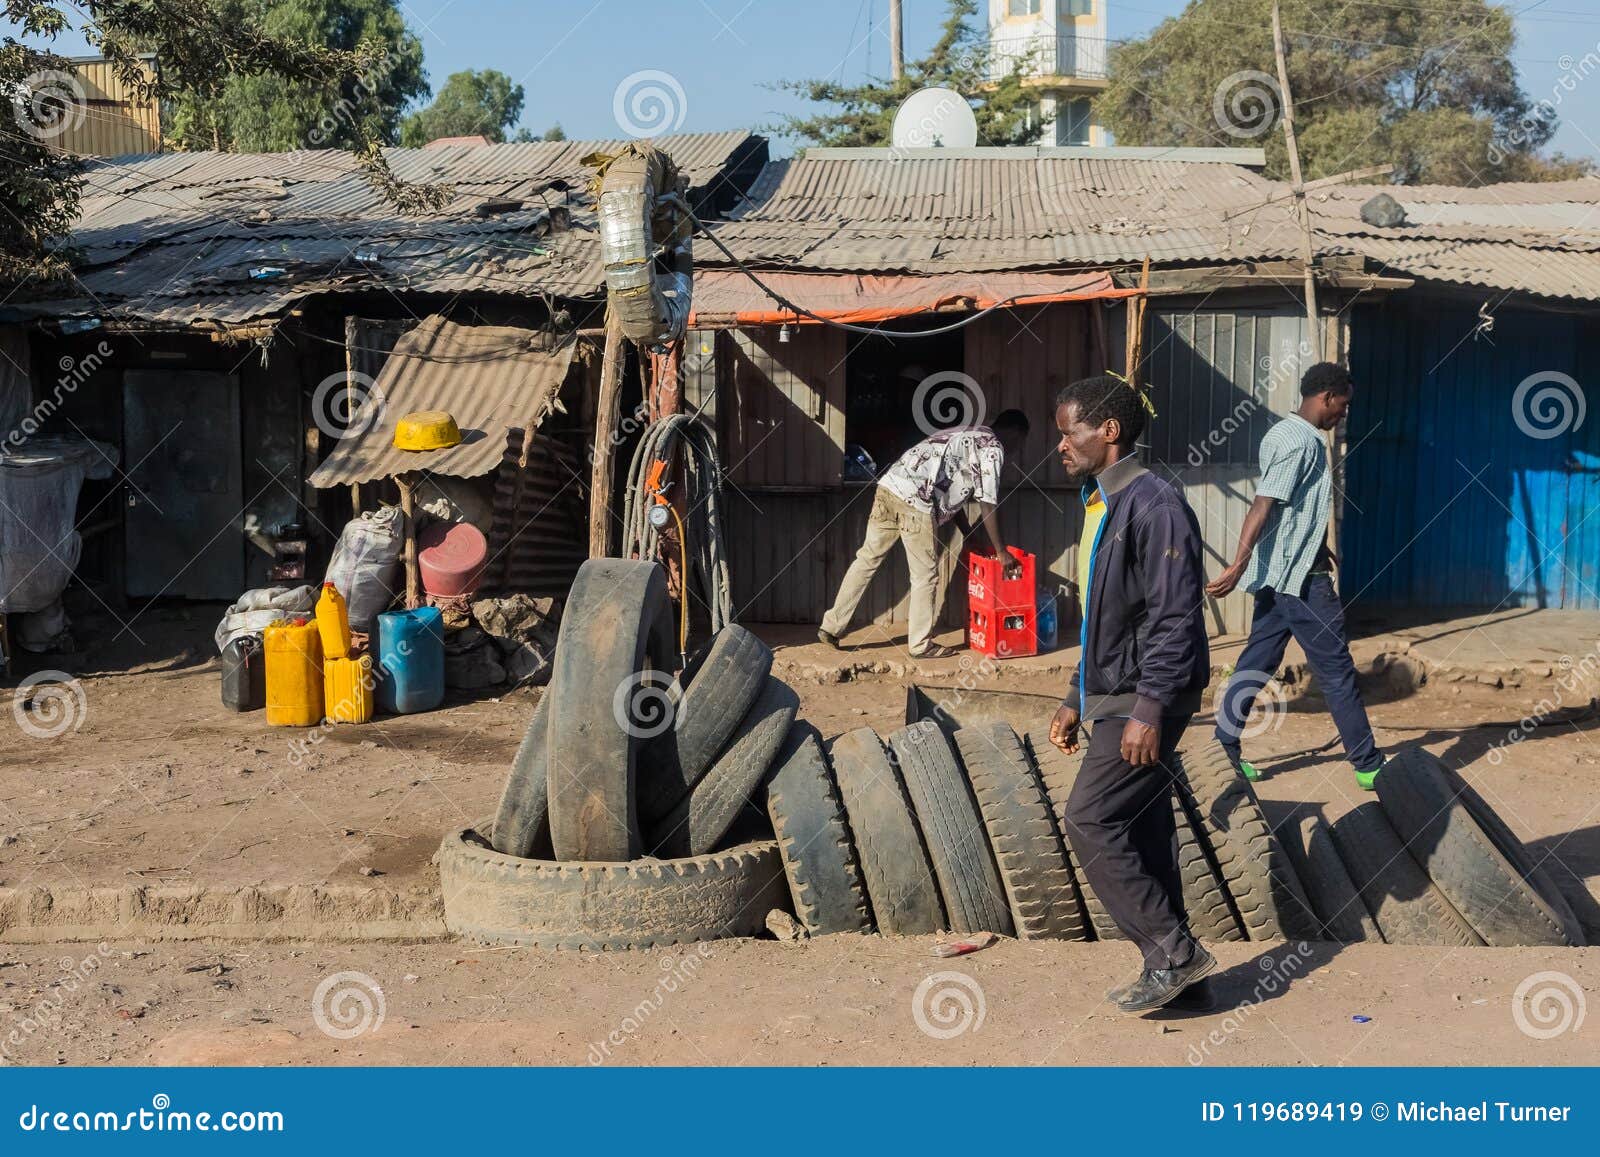 tire-salesman-on-a-busy-street-with-various-informal-shops-in-th-editorial-stock-image-image